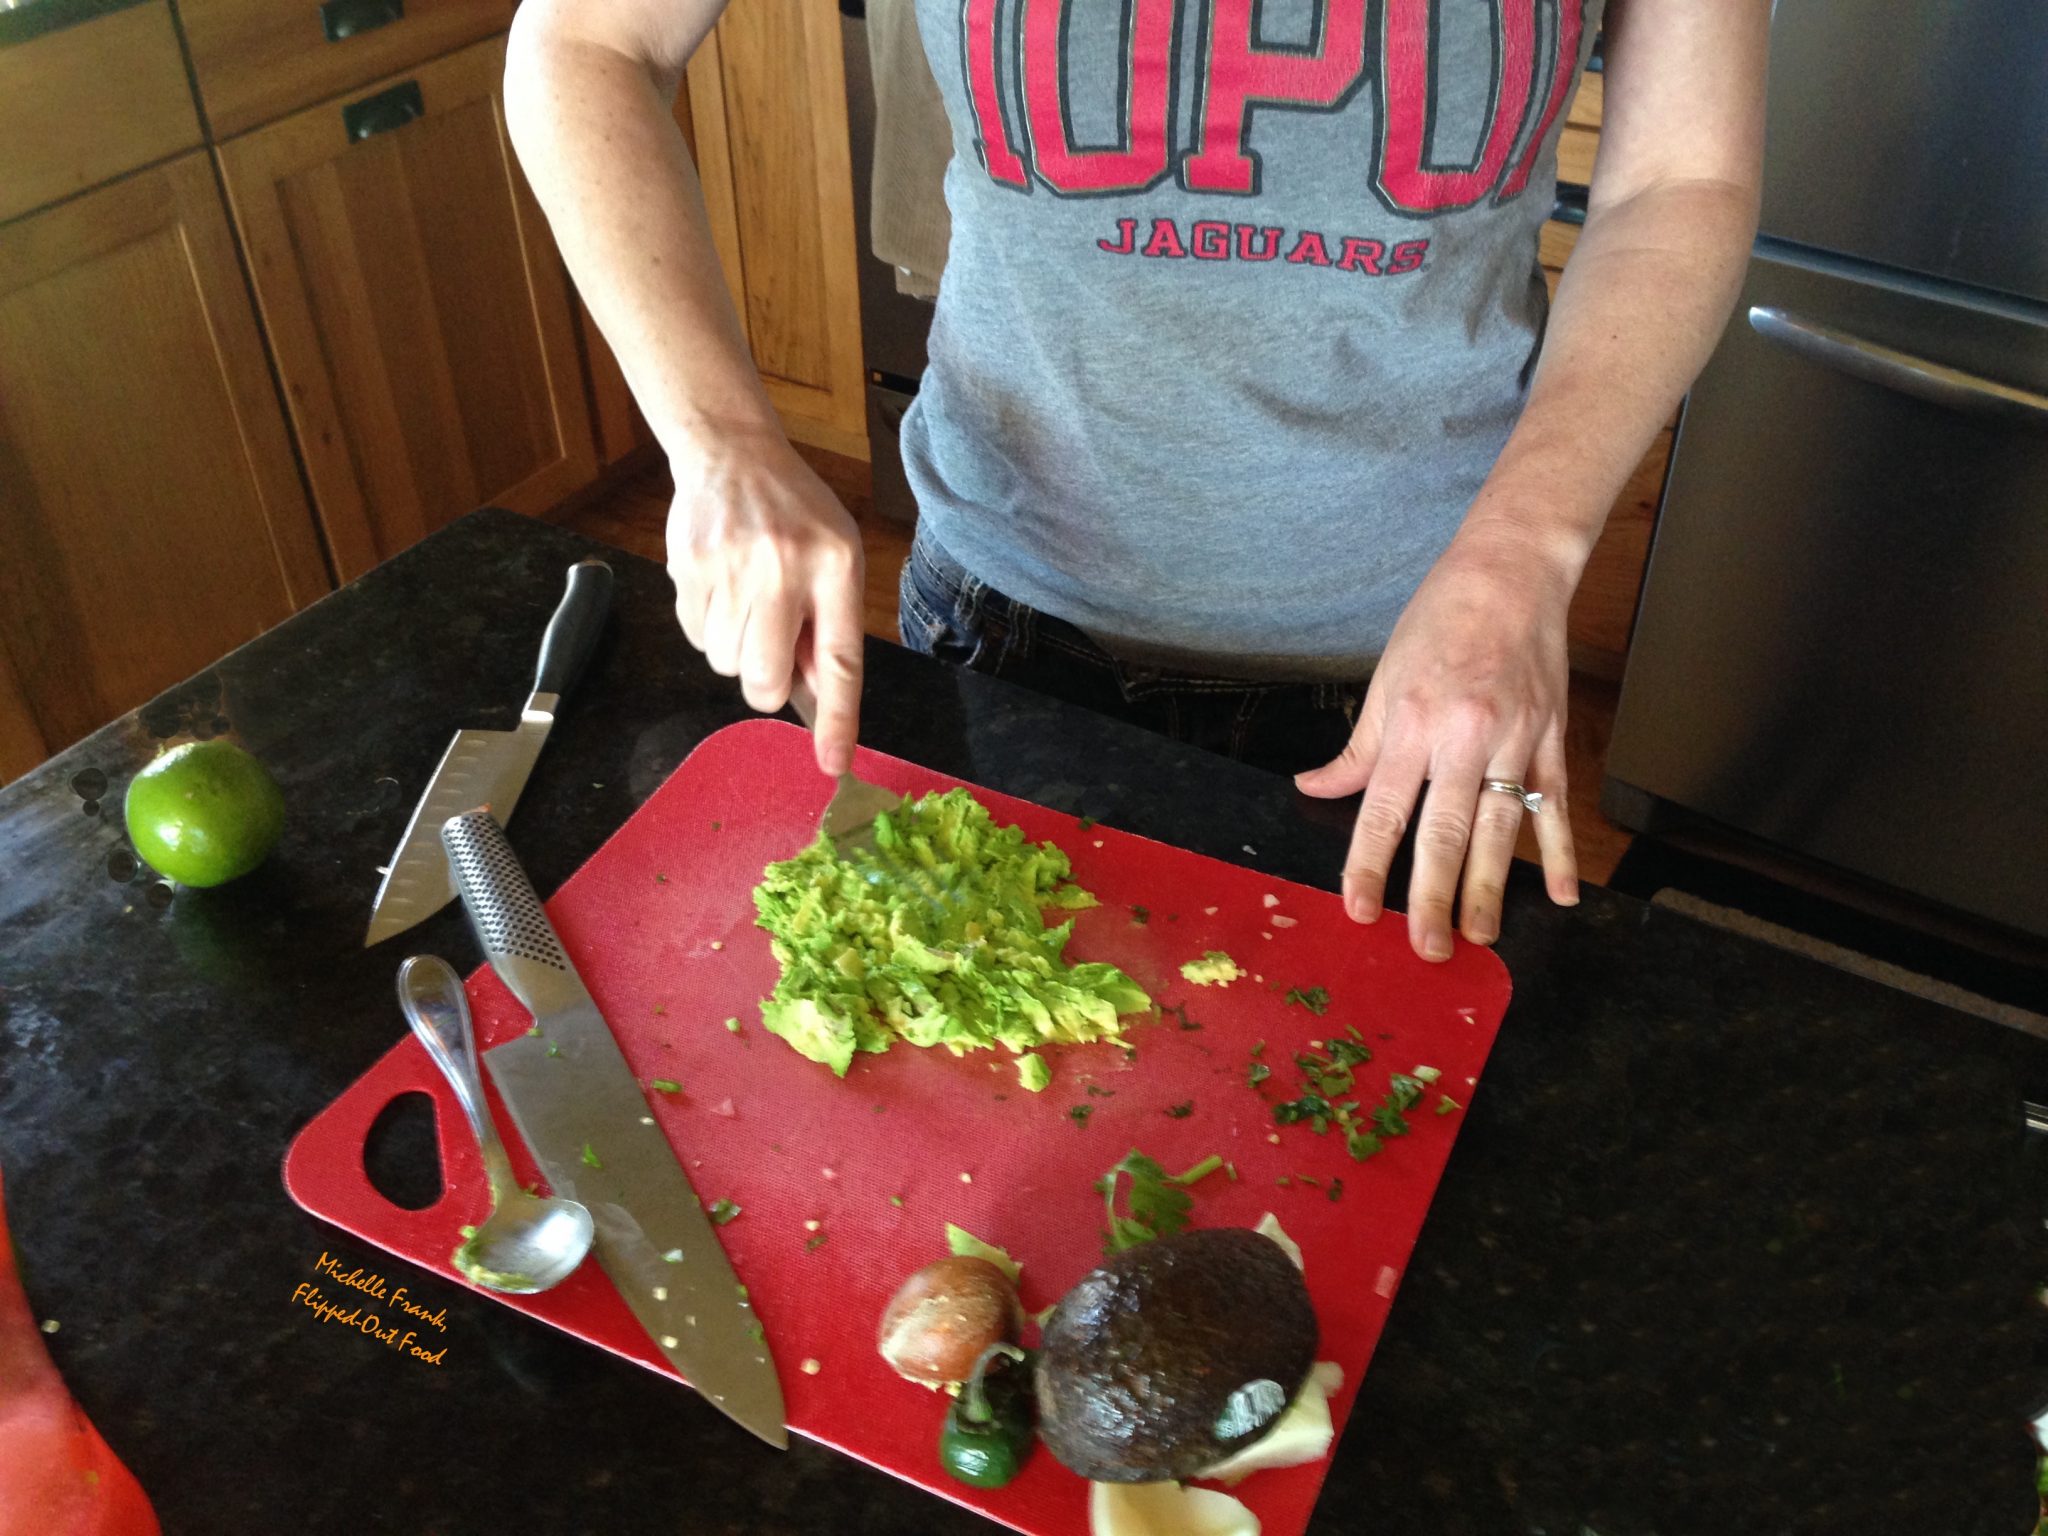 A fork mashing up avocados with a large fork on a red cutting board.